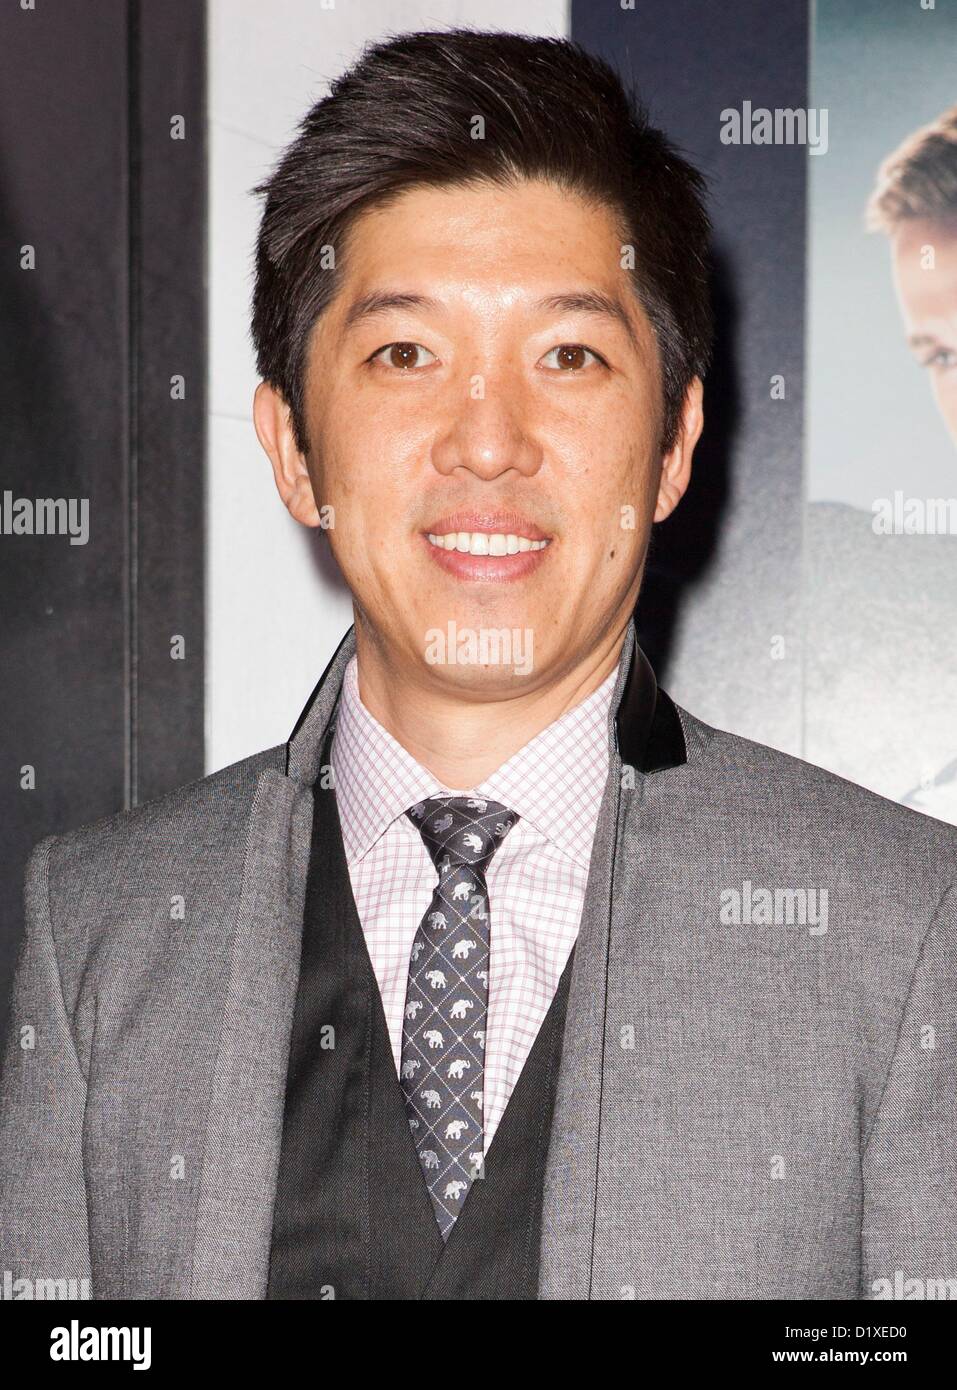 Dan Lin at arrivals for GANGSTER SQUAD Premiere, Grauman's Chinese Theatre, Los Angeles, CA January 7, 2013. Photo By: Emiley Schweich/Everett Collection Stock Photo